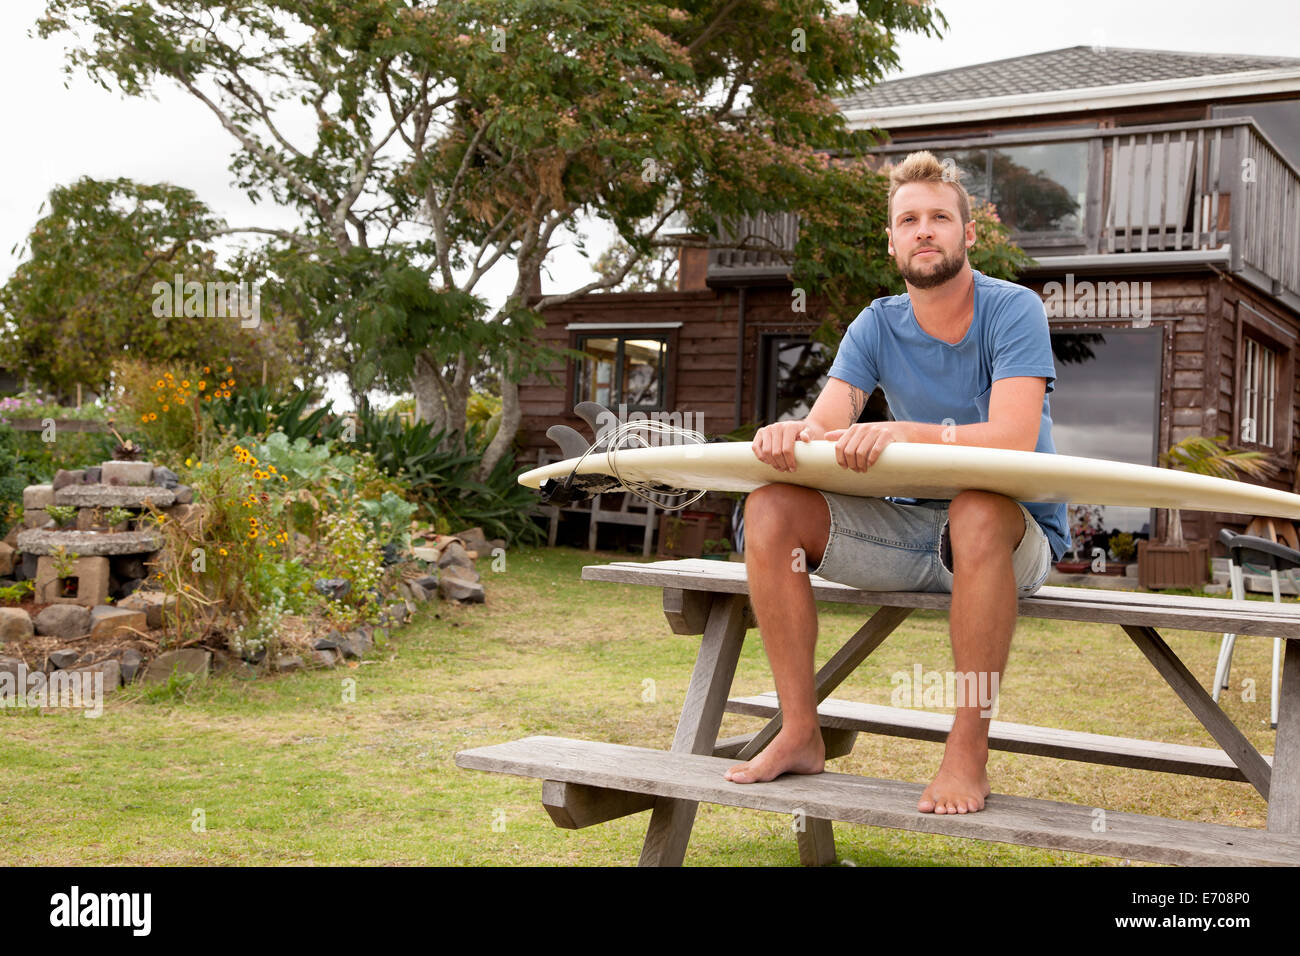 Portrait of male surfer sitting on picnic bench with surfboard on lap Stock Photo